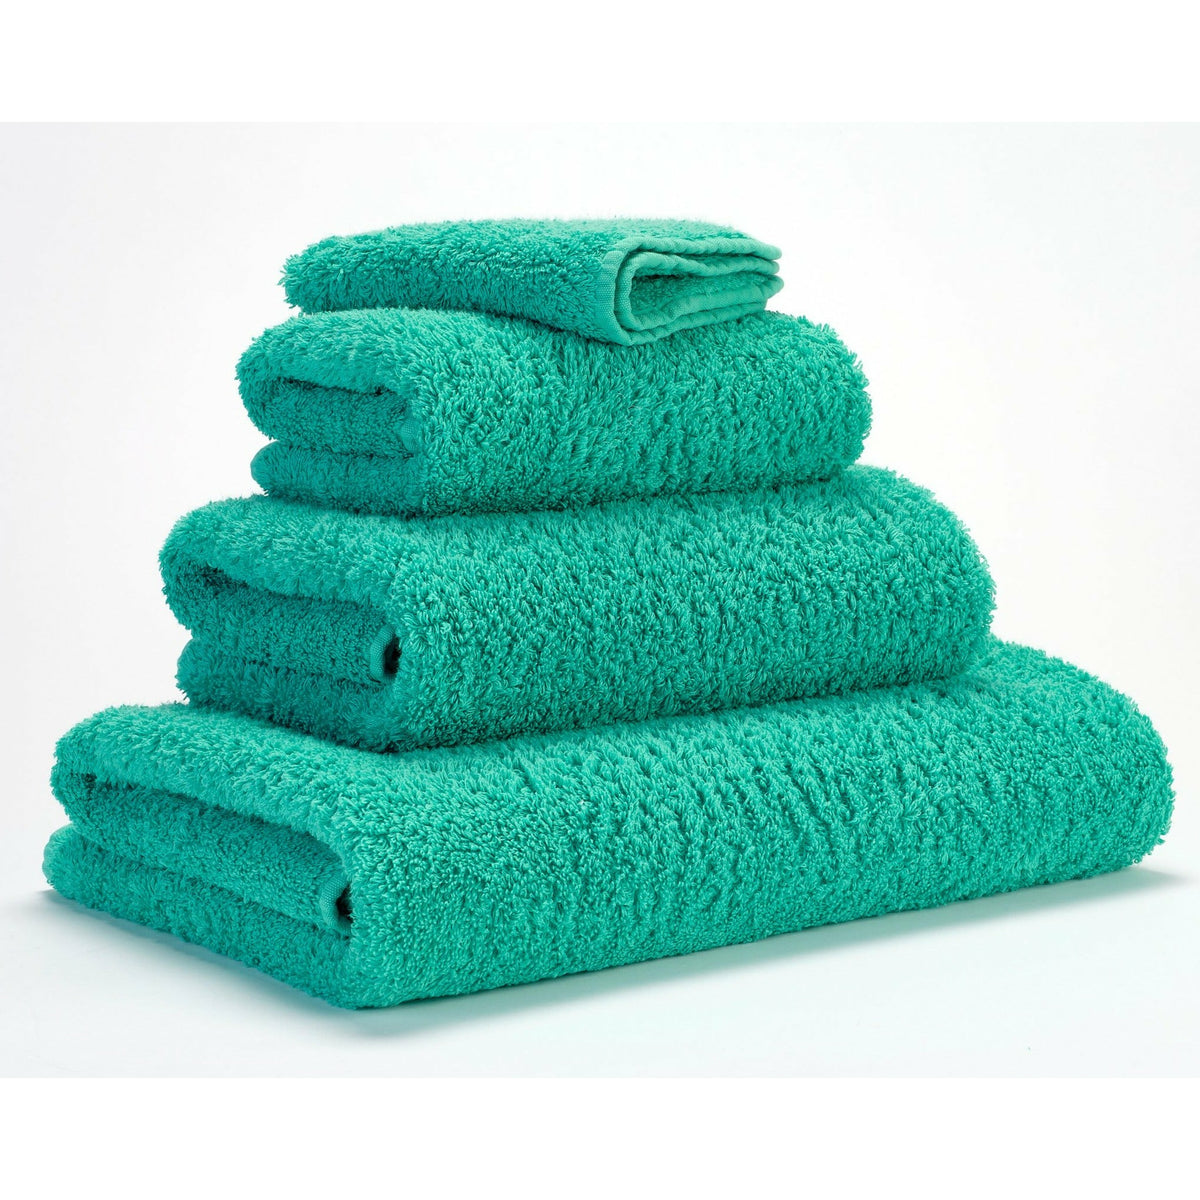 Abyss Super Pile Bath Towels Lagoon Fine Linens Stack Slanted